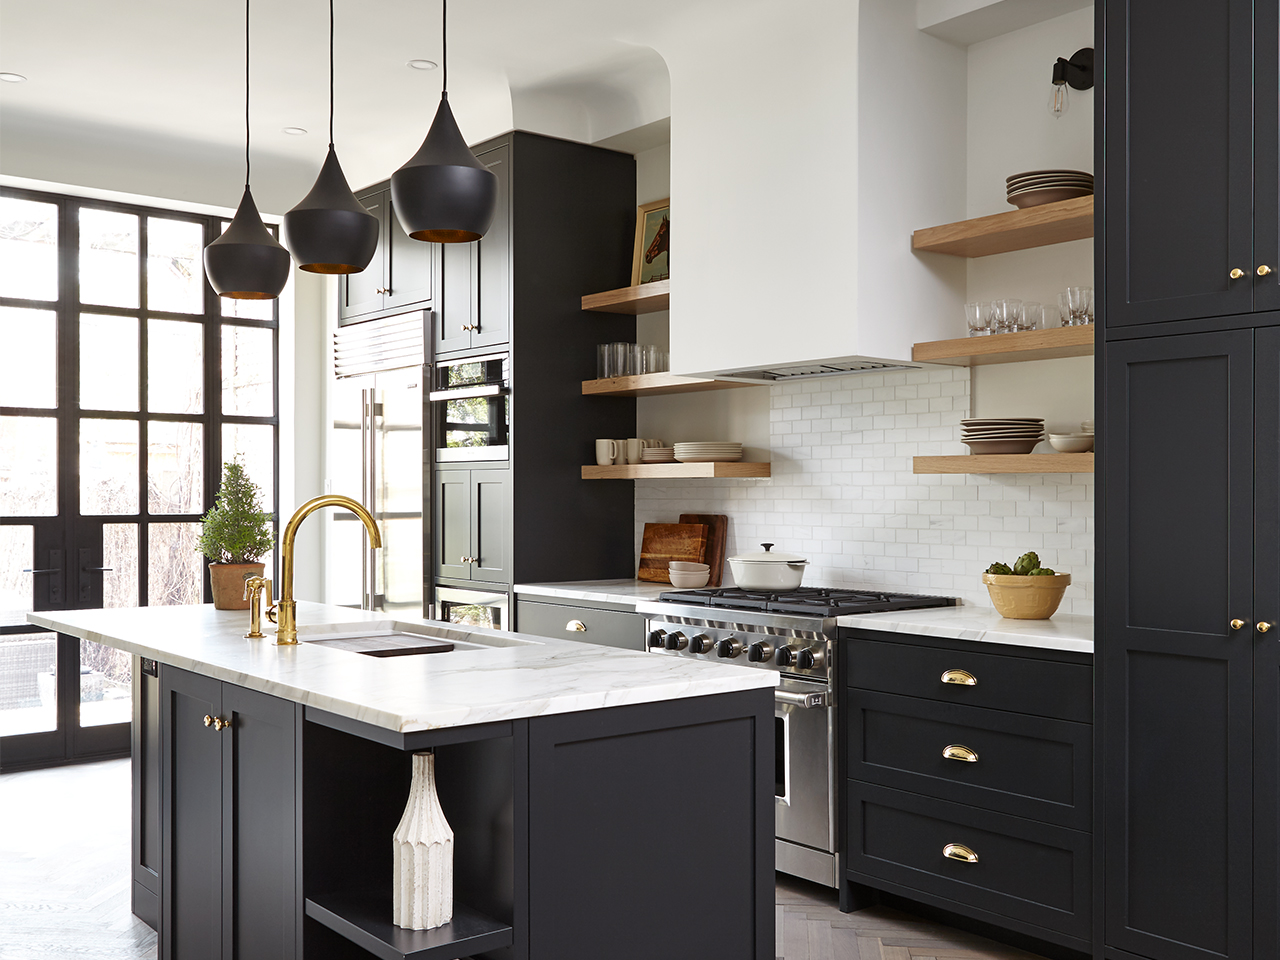 18 Of The Most Gorgeous Kitchen Design Ideas On Pinterest   Chatelaine